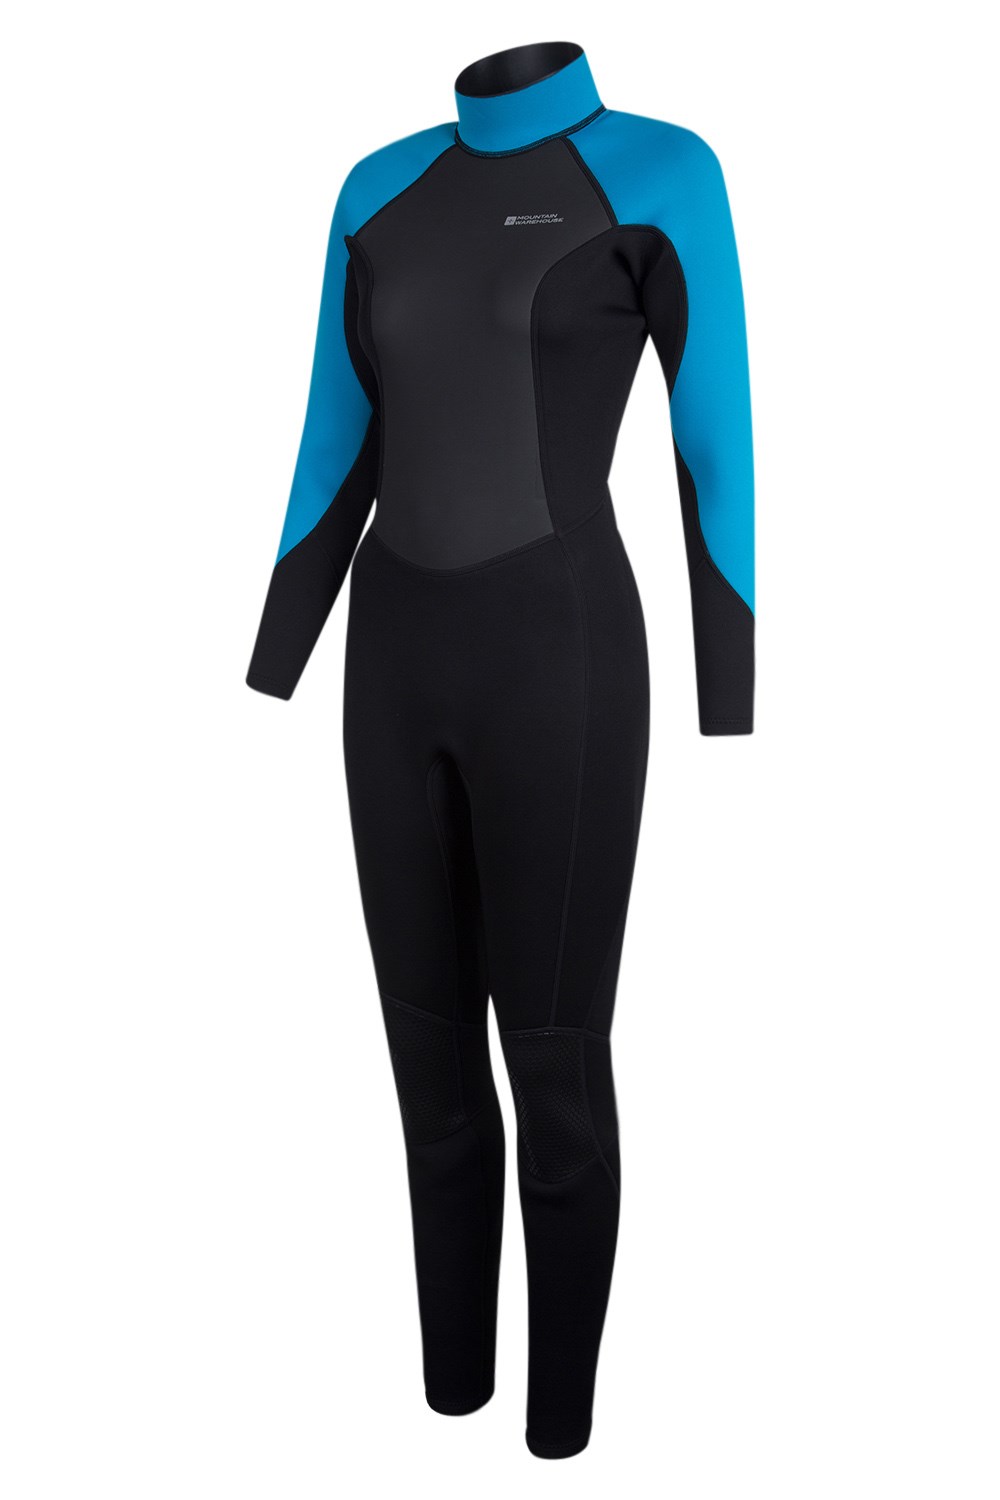 Mountain Warehouse Womens Wetsuit Contour Fit Easy Glide Zip Adjustable Ladies 